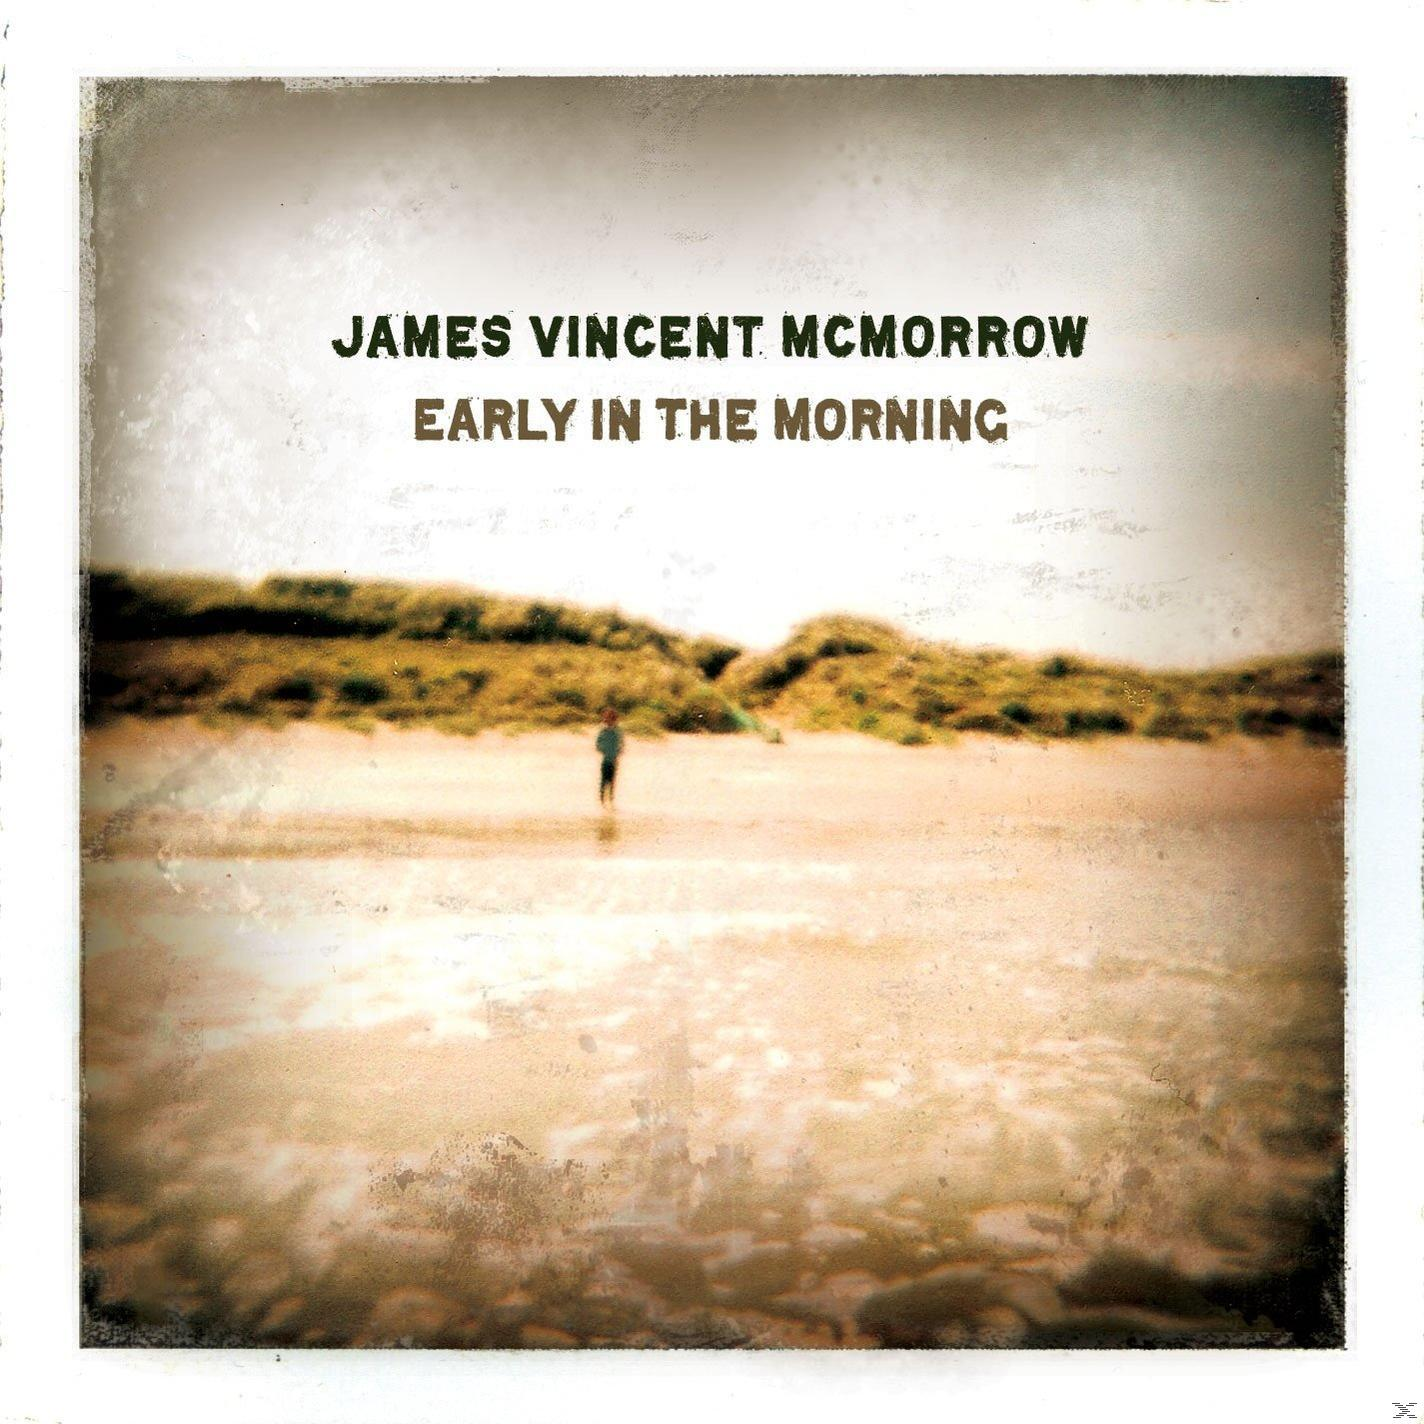 Vincent (CD) - Early The - Mcmorrow Morning In James